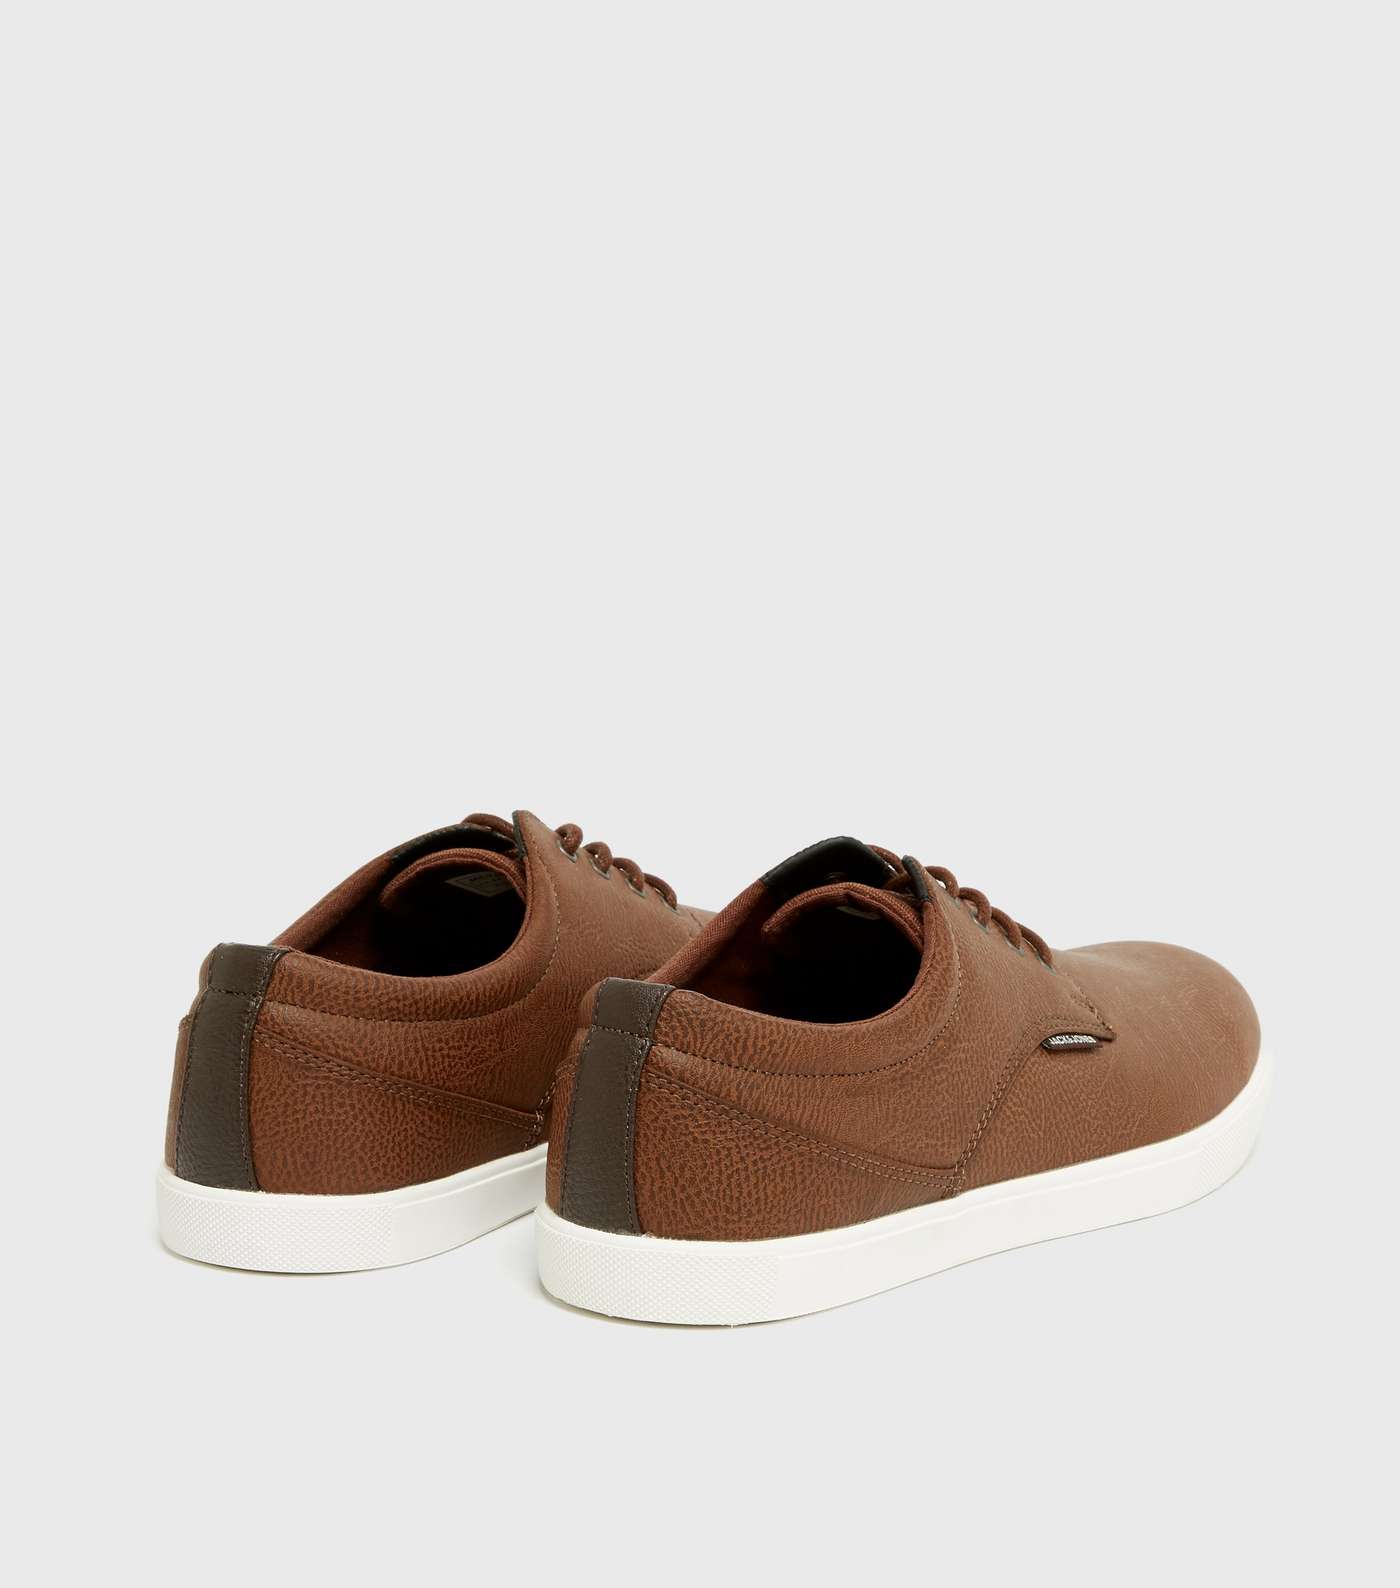 Jack & Jones Brown Lace Up Trainers Image 4